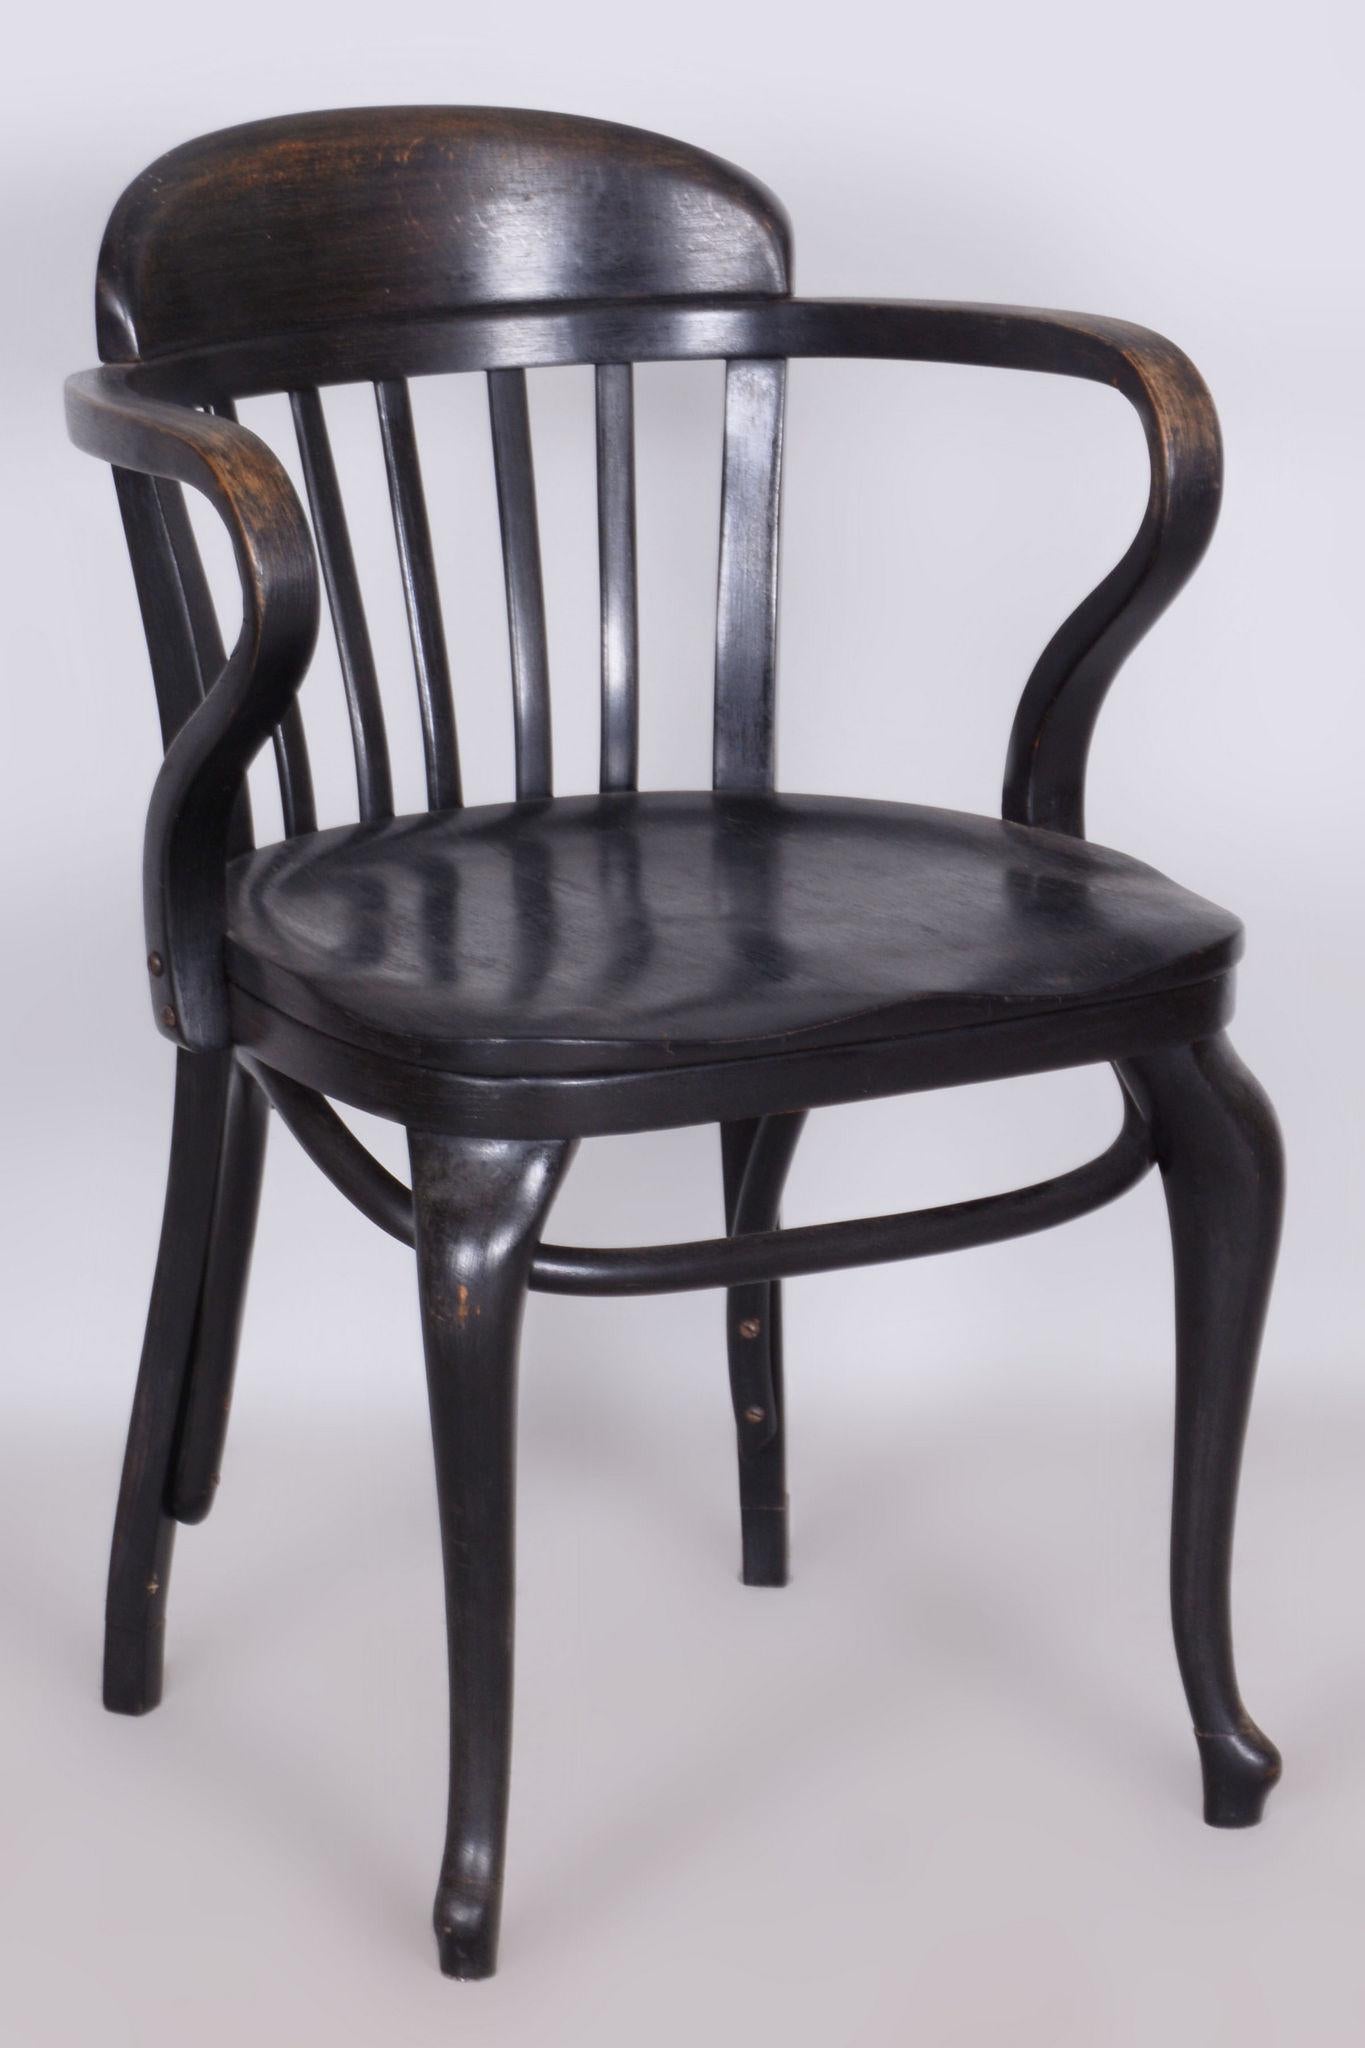 Restored ArtDeco Beech Armchair made by influential Austrian furniture manufacturer Thonet.		
	
Maker: Thonet
Source: Austria
Period: 1920-1929
Material: Beech

This item features classic Art Deco elements. Art Deco is a style that originates from